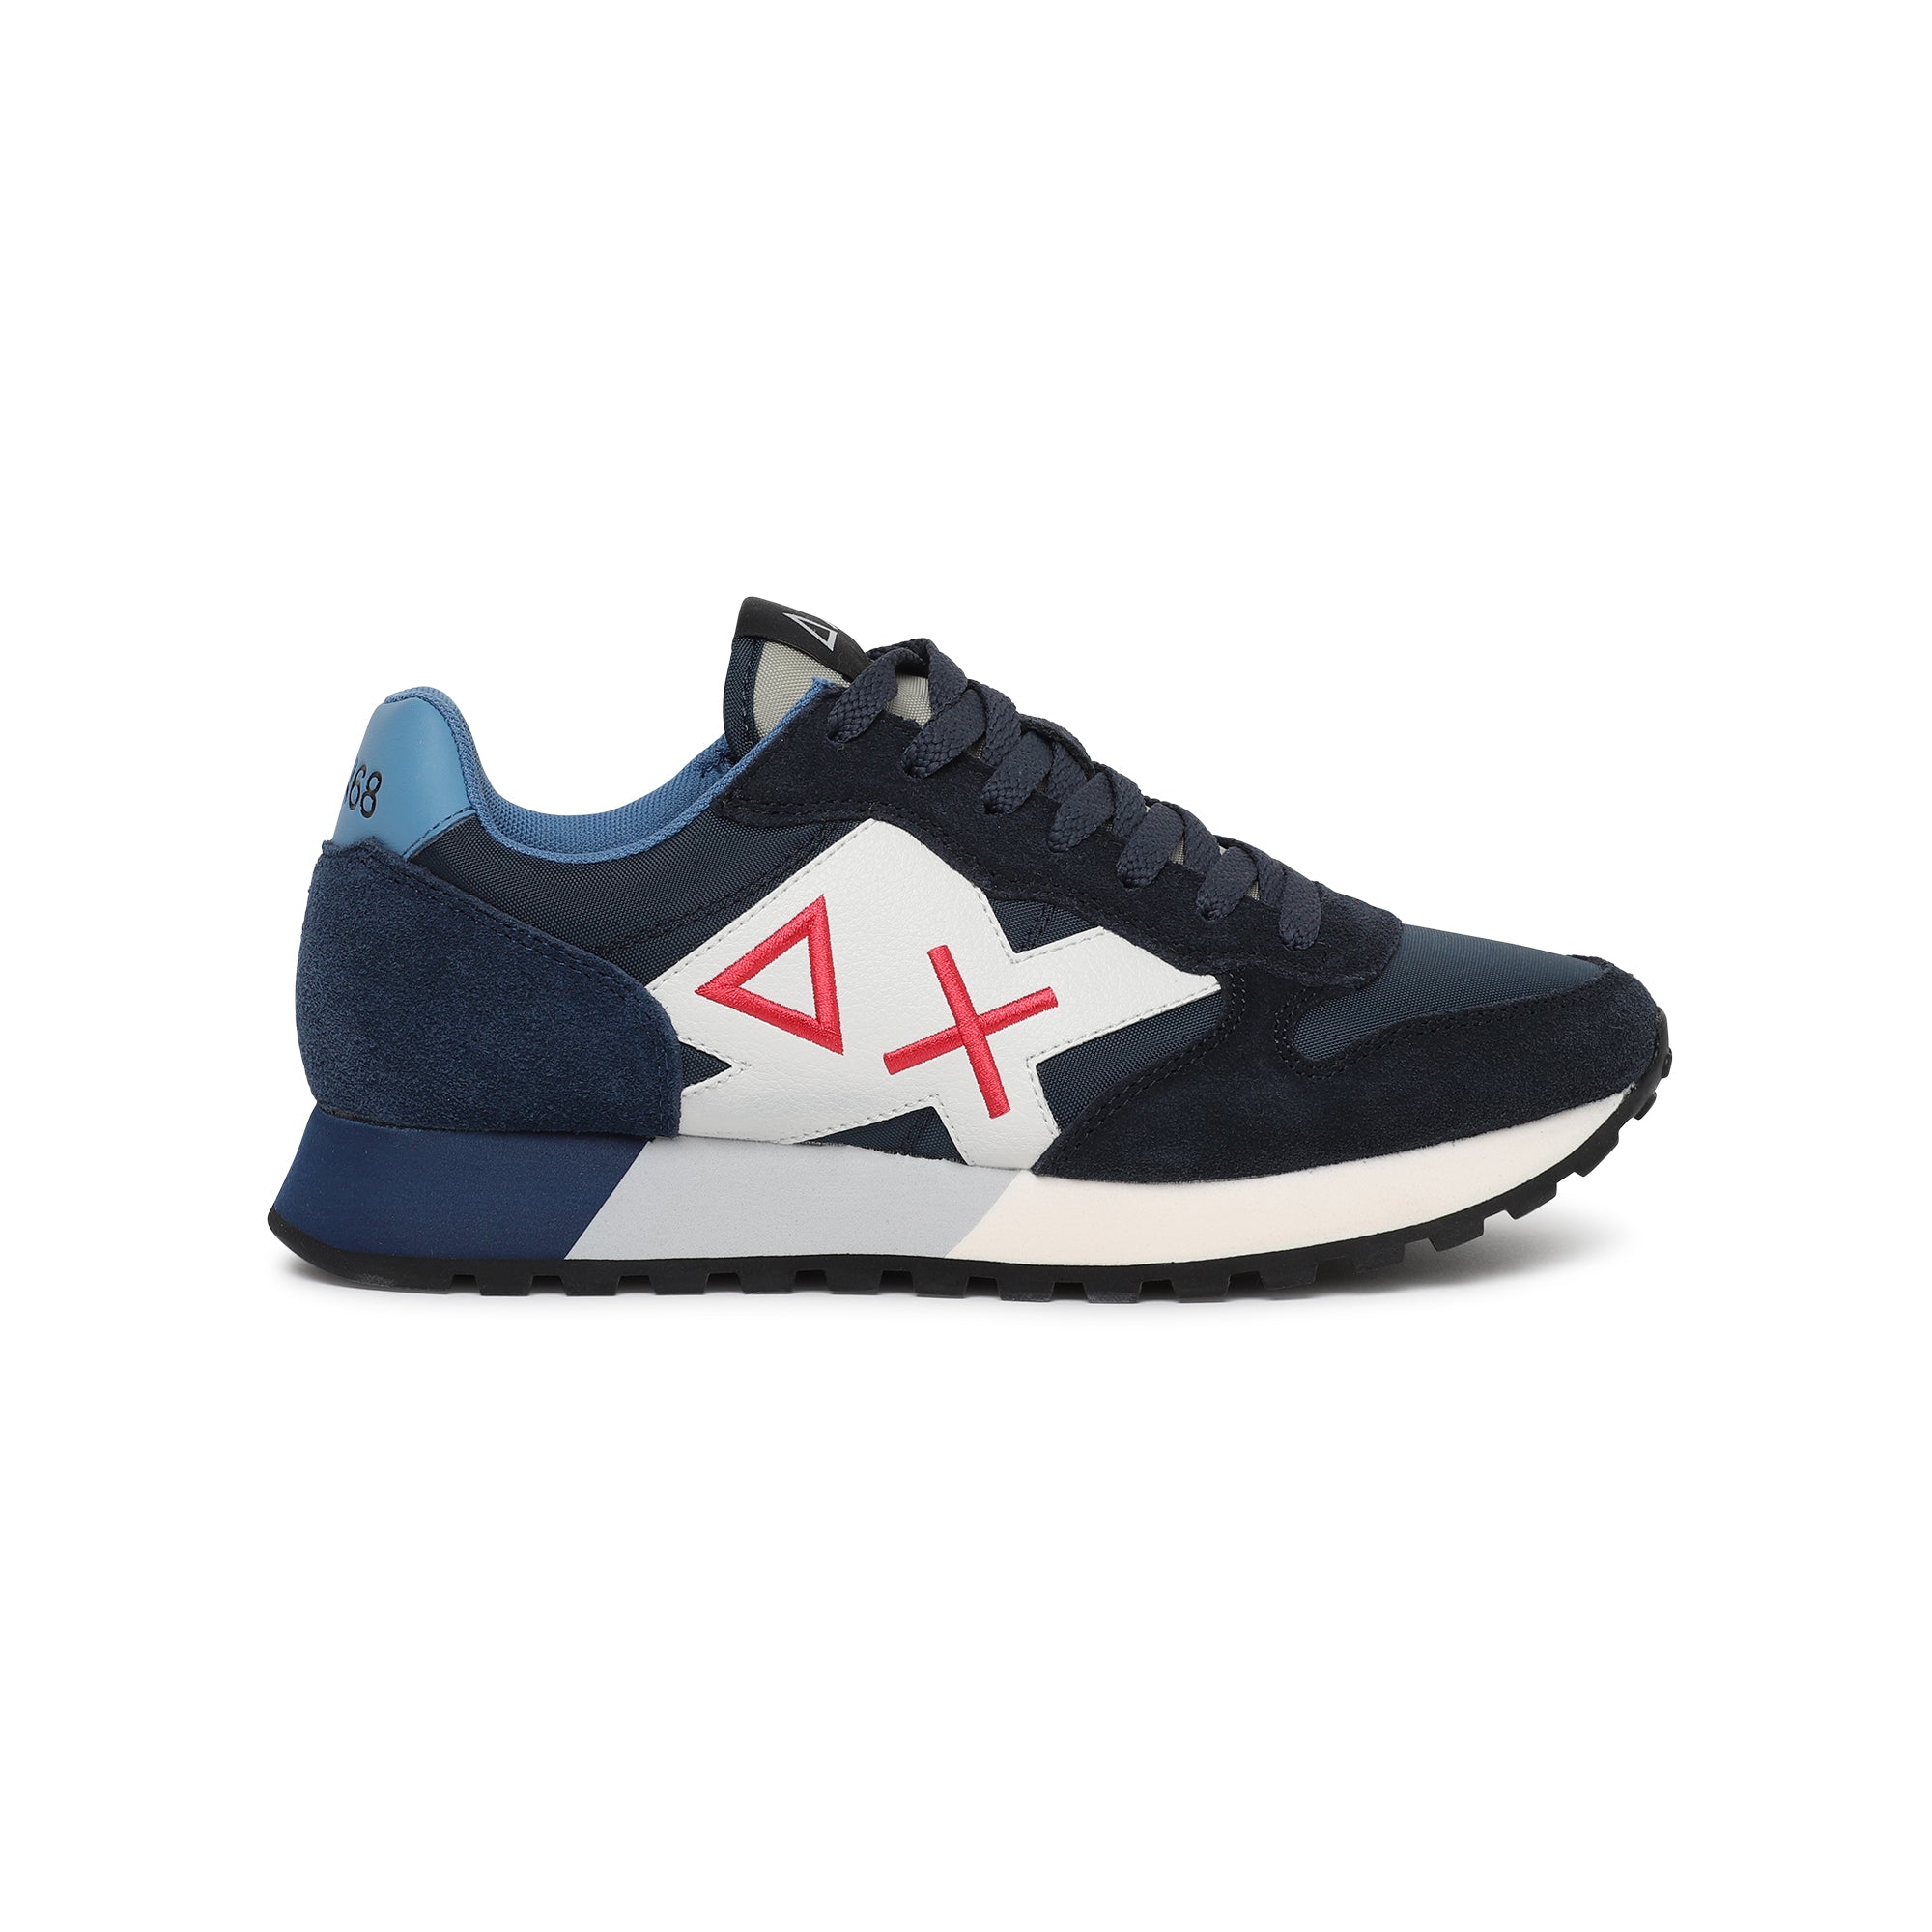 Sneakers sun68 shoes  navy blue uomo 